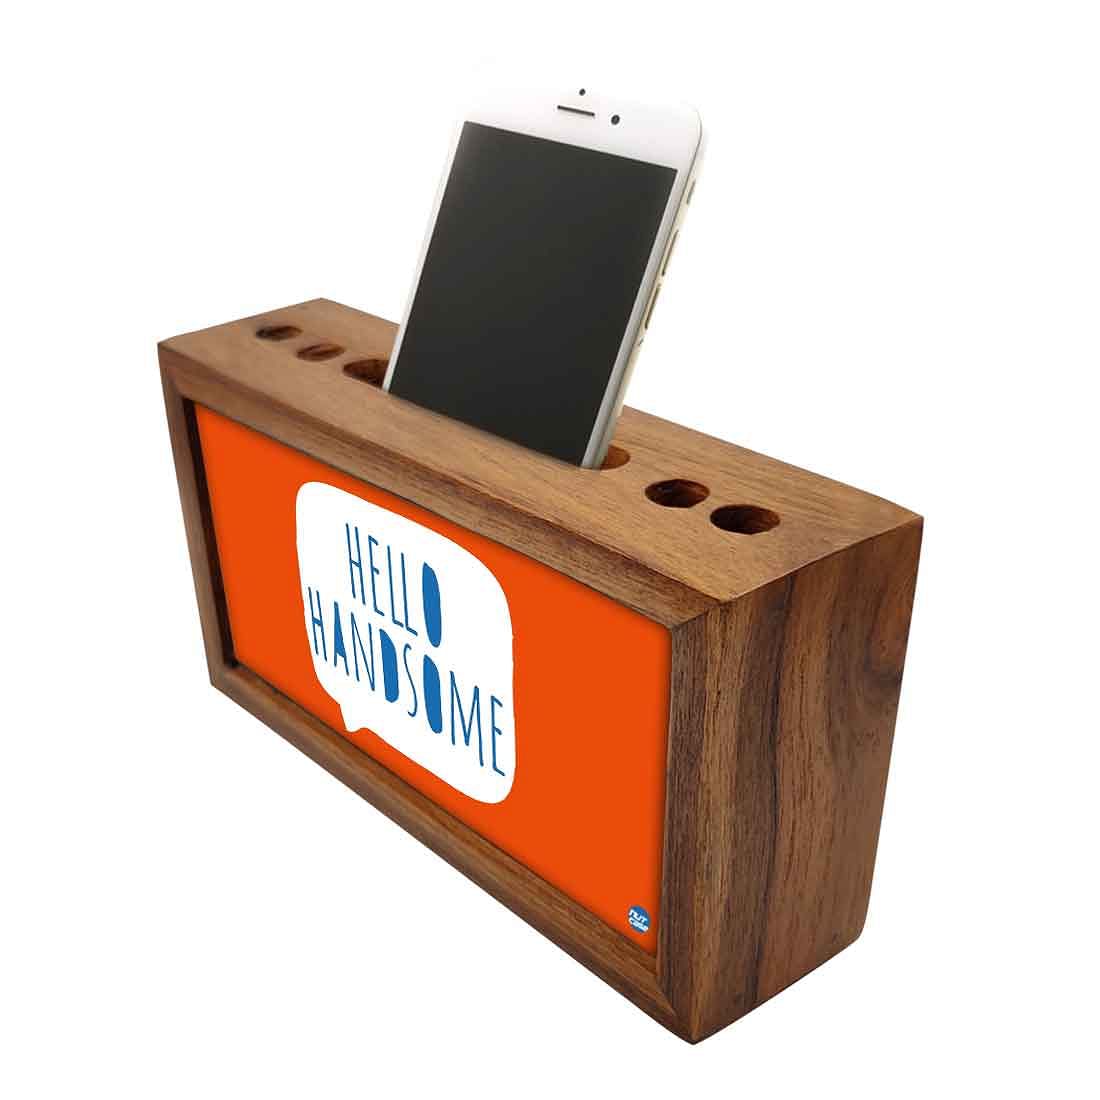 Wooden pen and pencil holder - Hello Handsome Nutcase